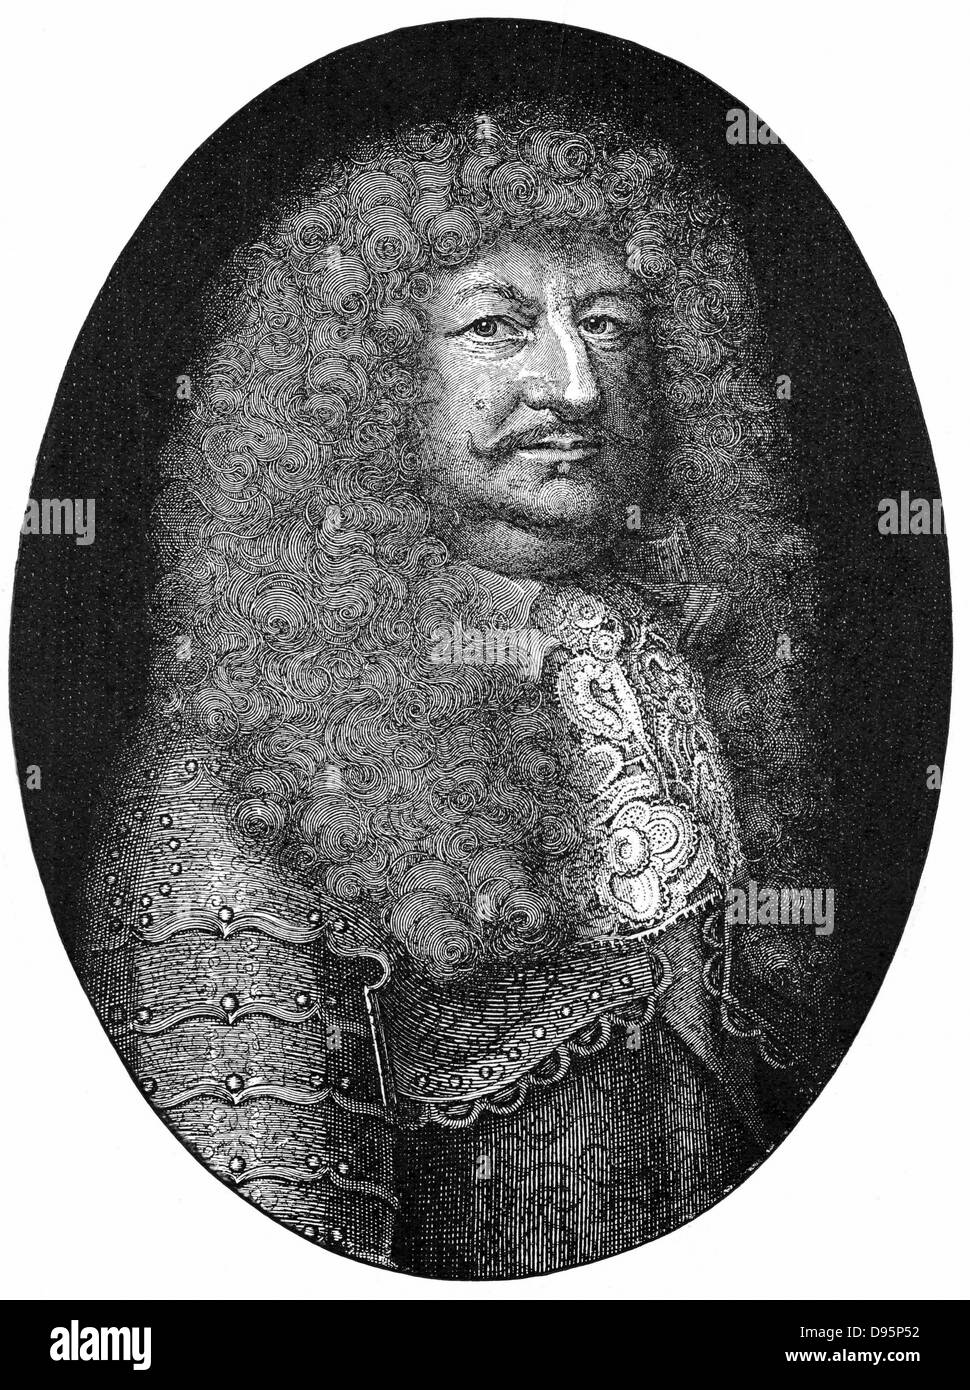 Frederick William (1620-1688) Elector of Brandenburg from 1640, known as the Great Elector. After engraving of 1683 by Antoine Masson. Stock Photo